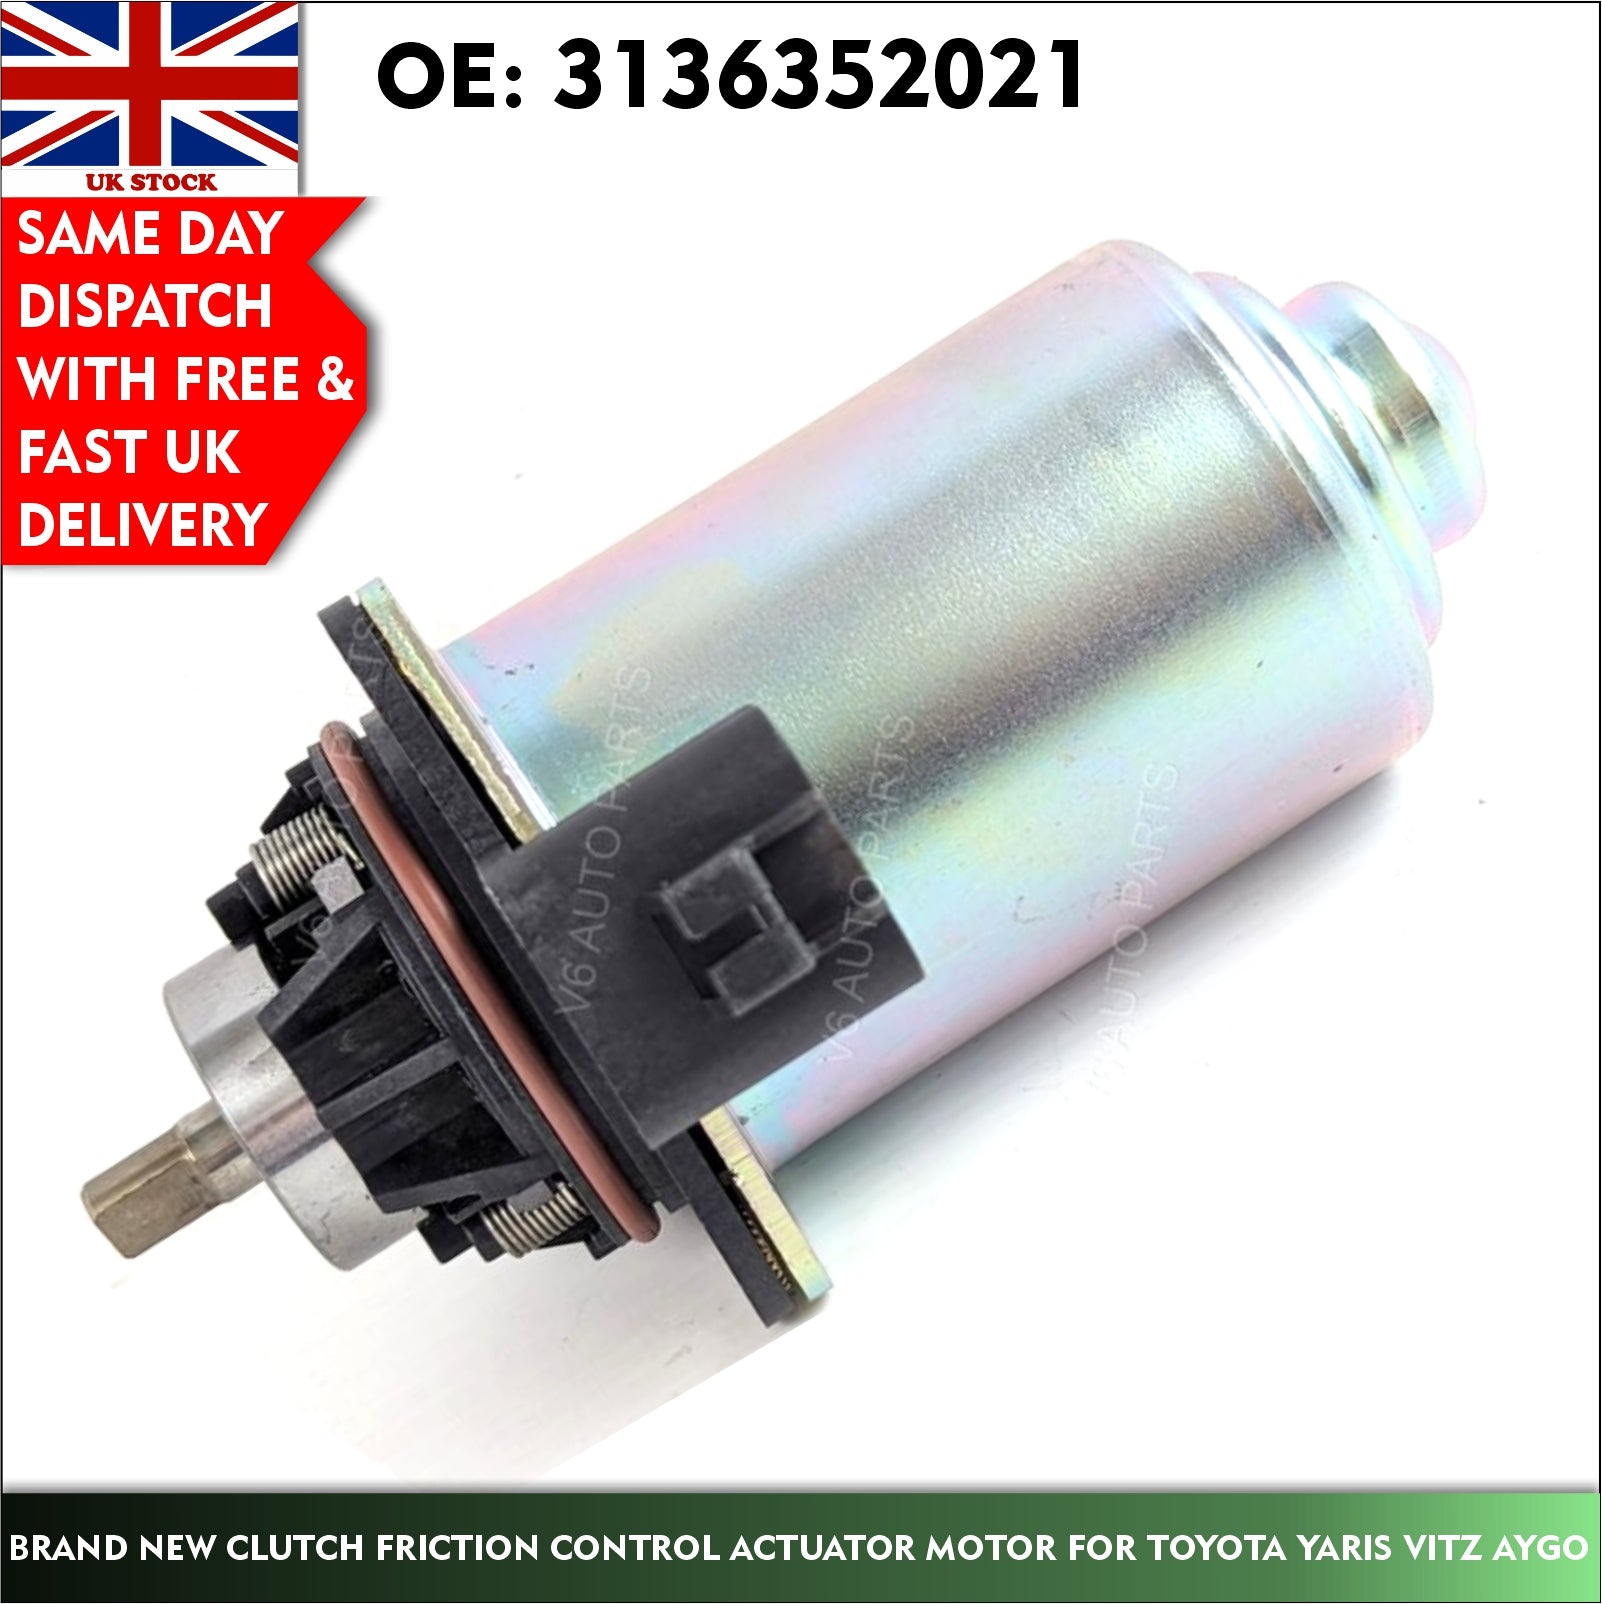 BRAND NEW CLUTCH FRICTION ACTUATOR MOTOR FOR TOYOTA AURIS AND COROLLA VERSO